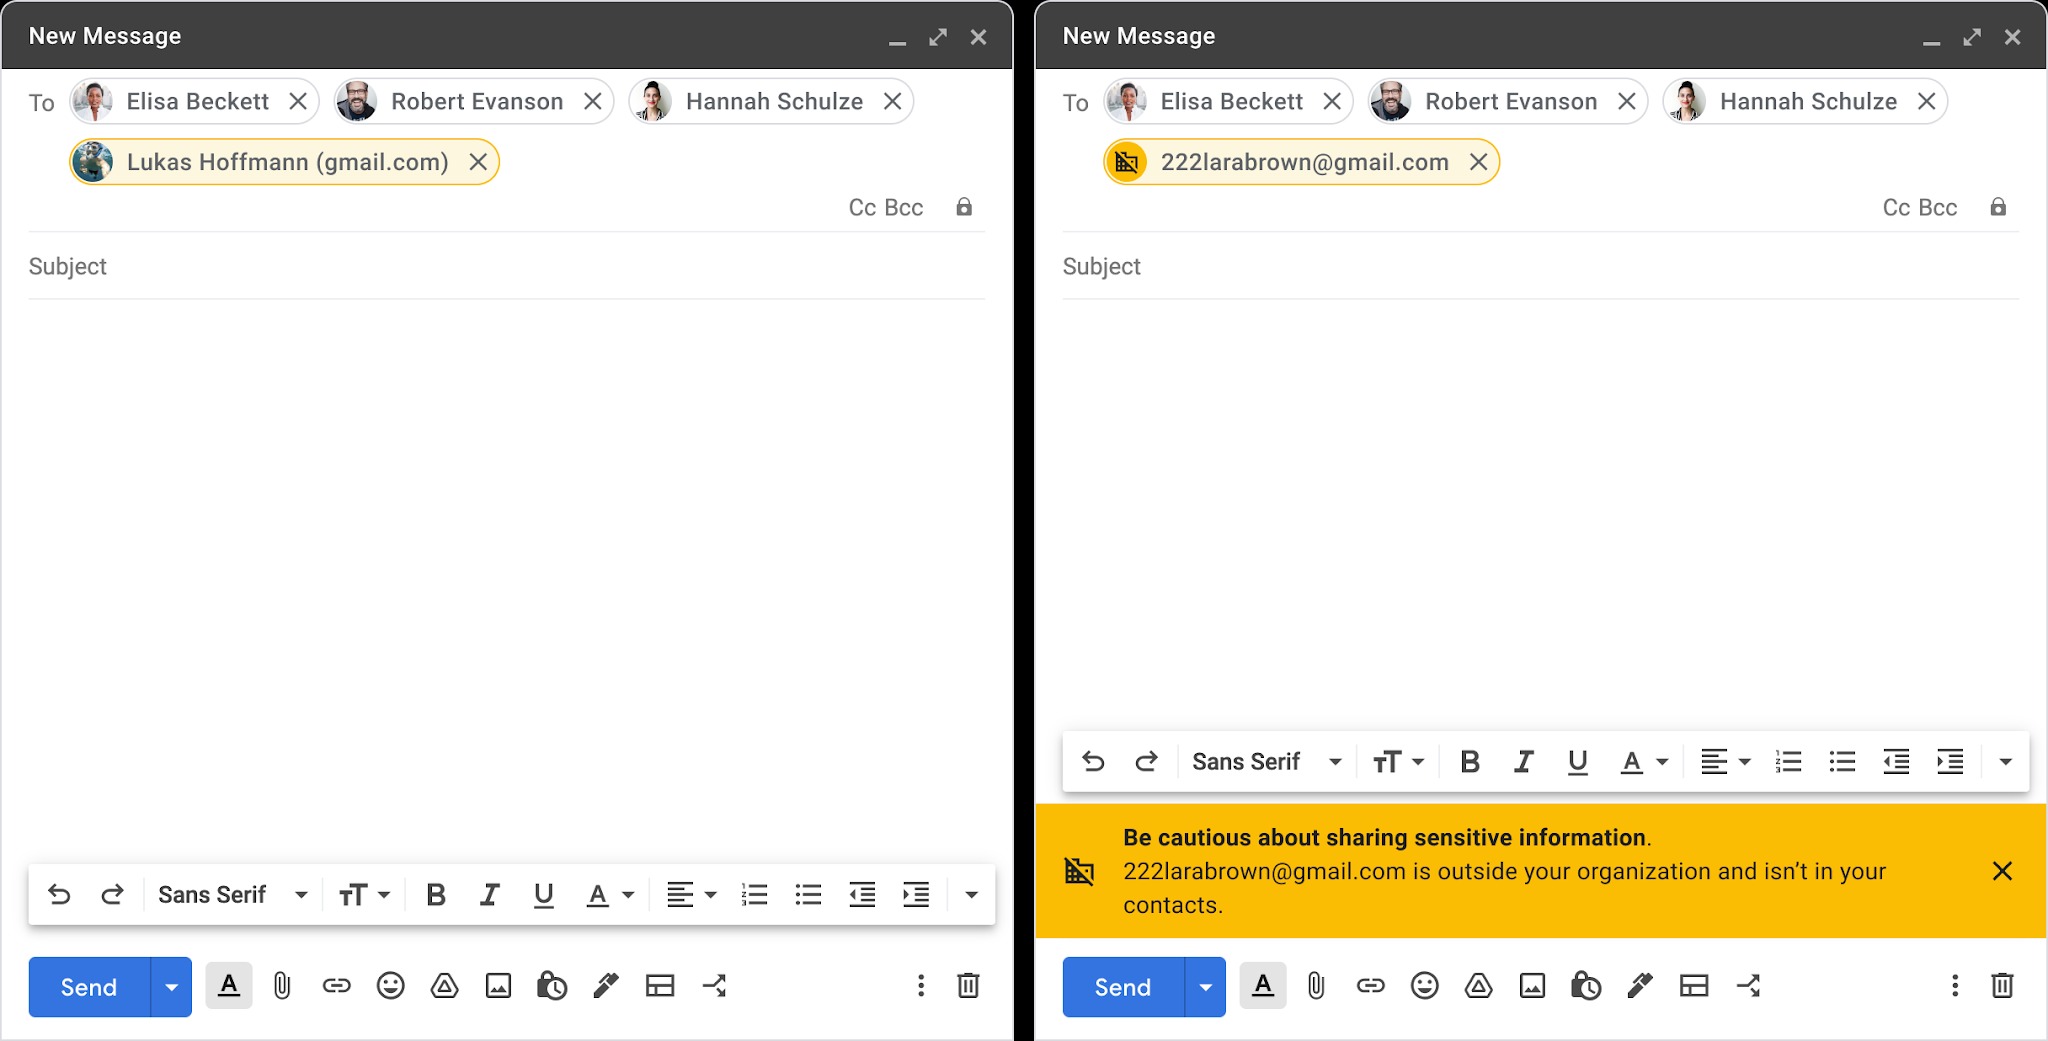 Visual Gmail updates for the recipient field